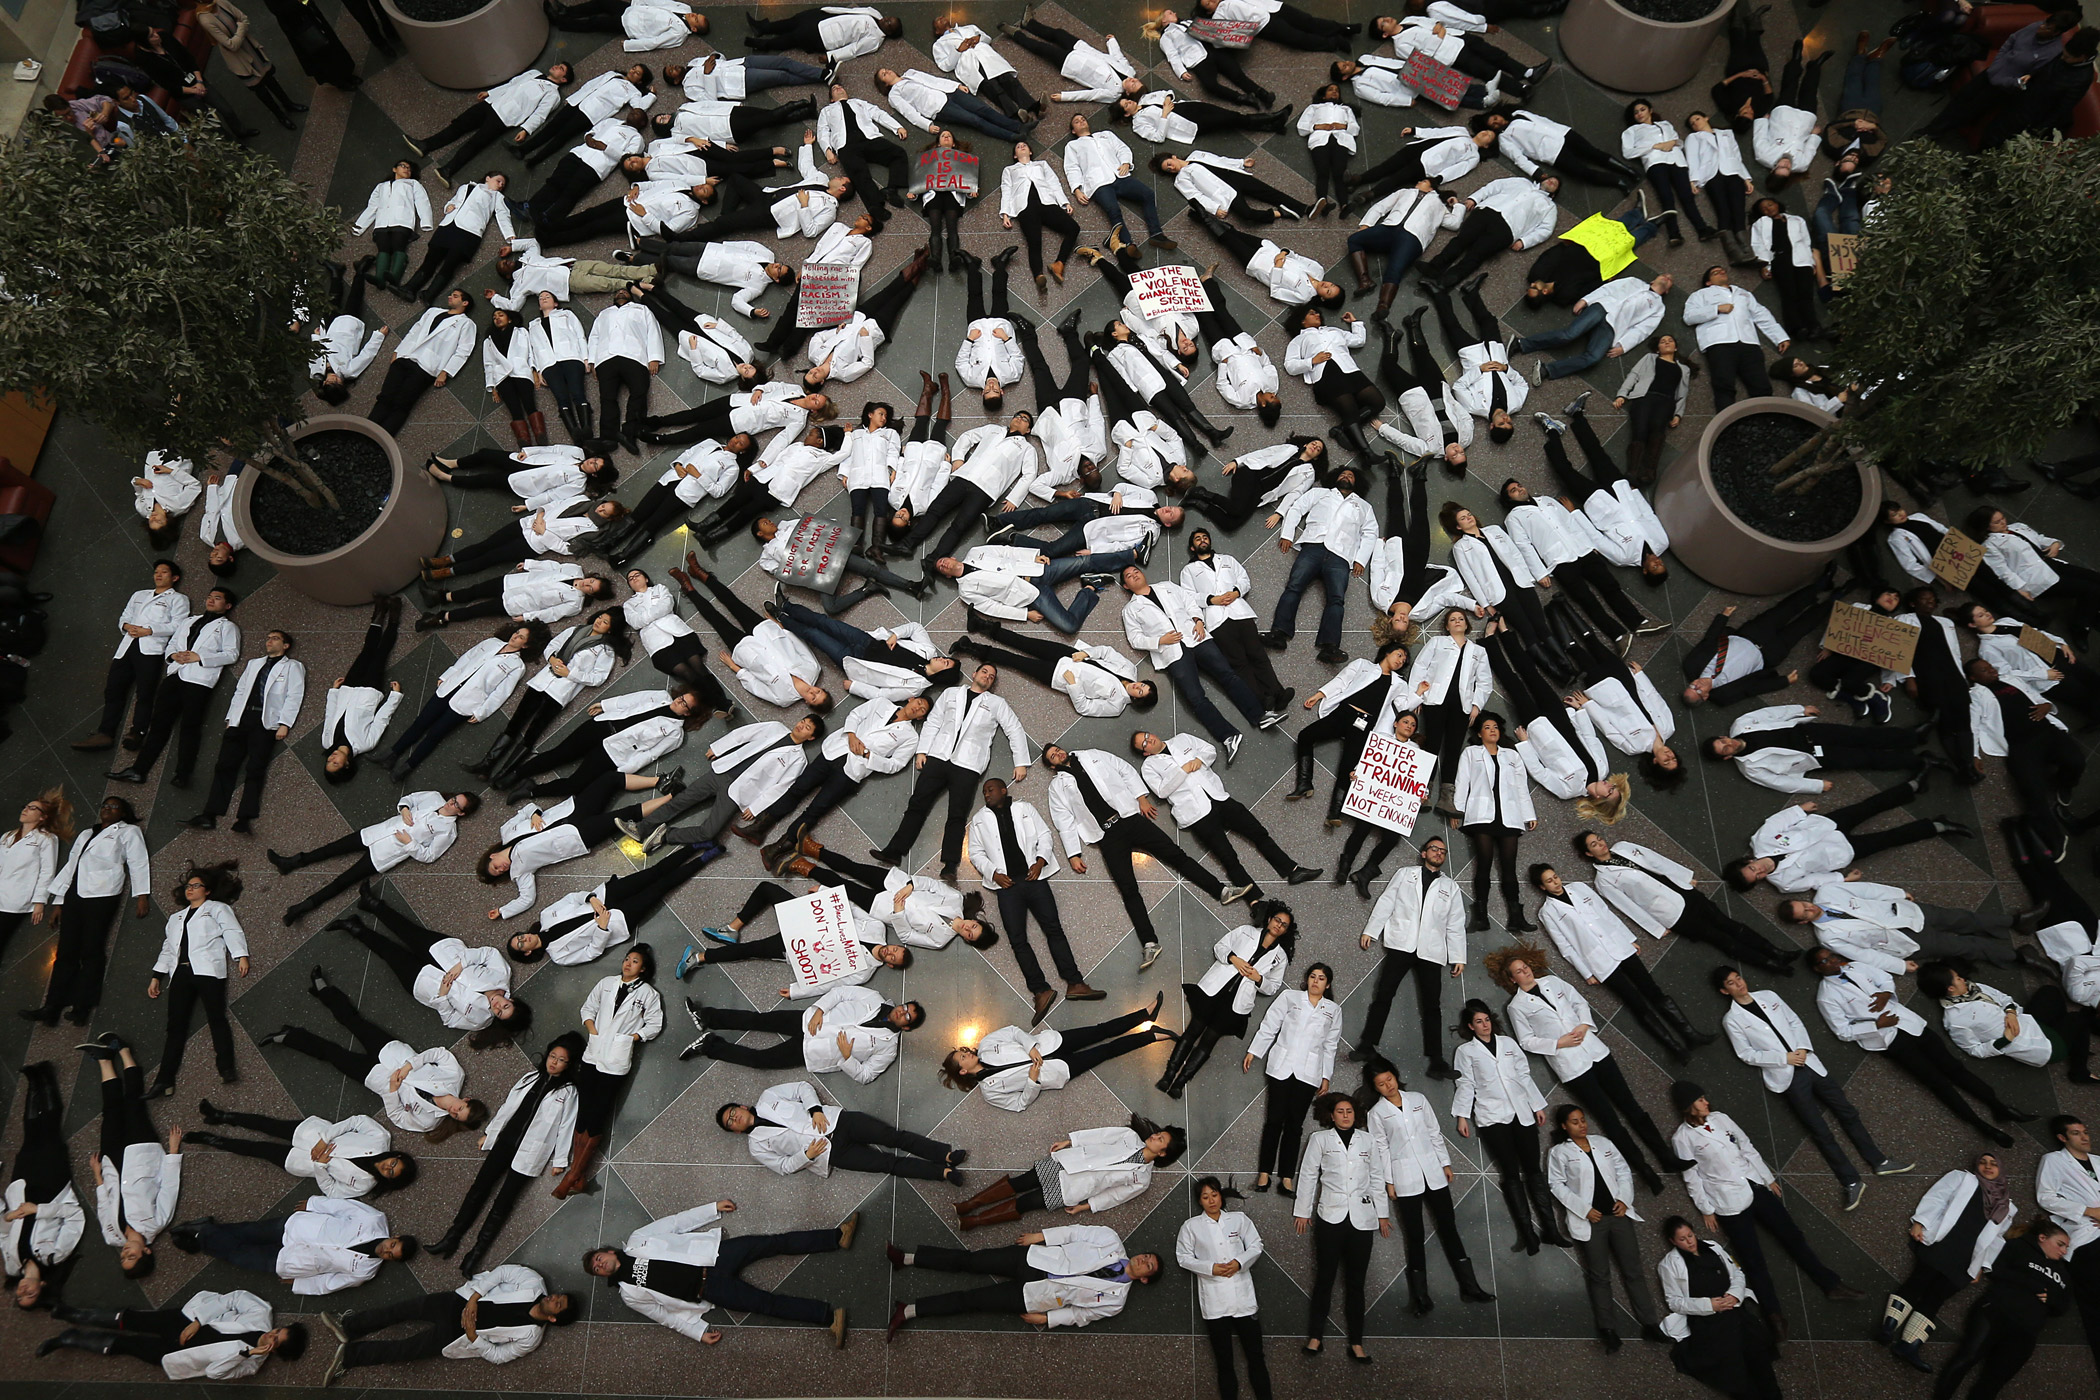 Students participate in a die-in at Harvard Medical School Medical Education Center on Dec. 10, 2014. The protest was held in response to the decisions by authorities to not bring indictments in the police killings of Michael Brown in Ferguson, Mo., and Eric Garner in New York. The Black Lives Matter movement has found support at campus's across the country.